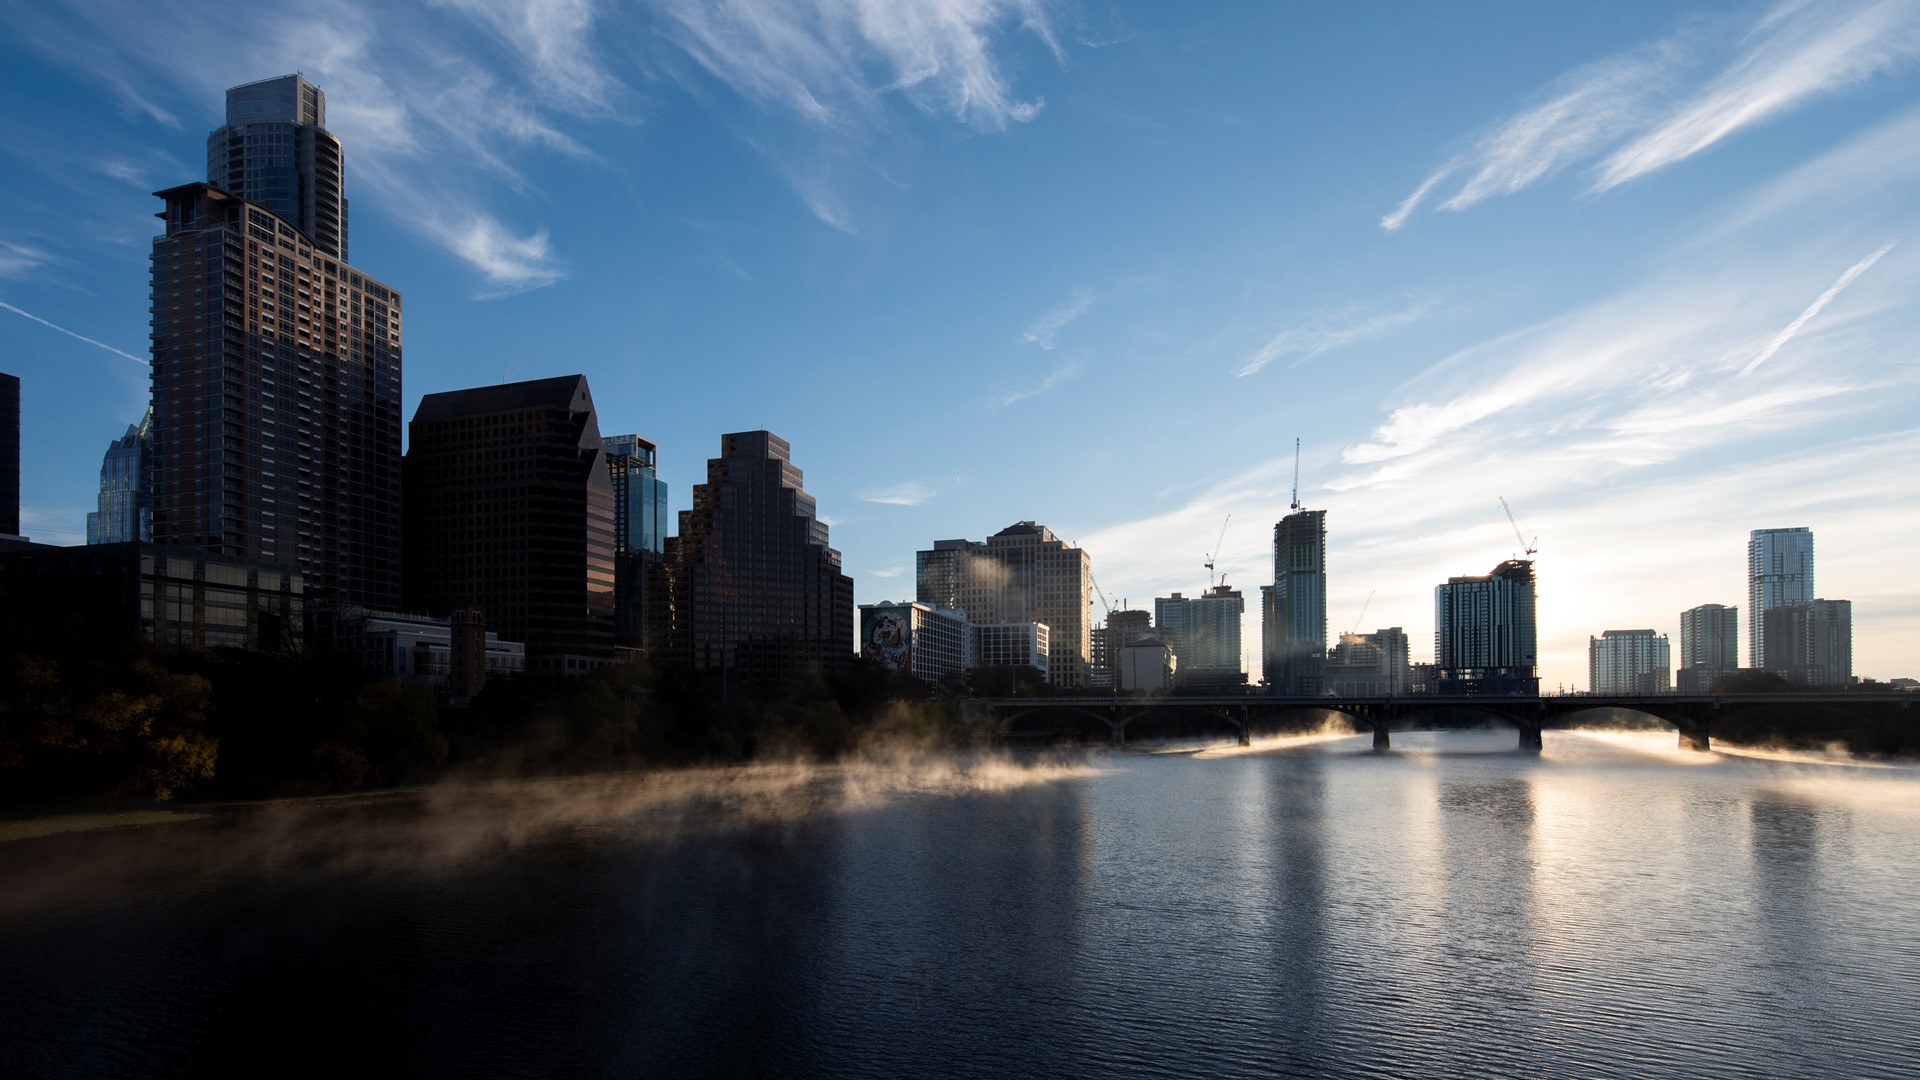 It’s truly a treasure in the center of Austin, but many people may not be aware that not so long ago, it was polluted with trash and its banks were caked in mud.